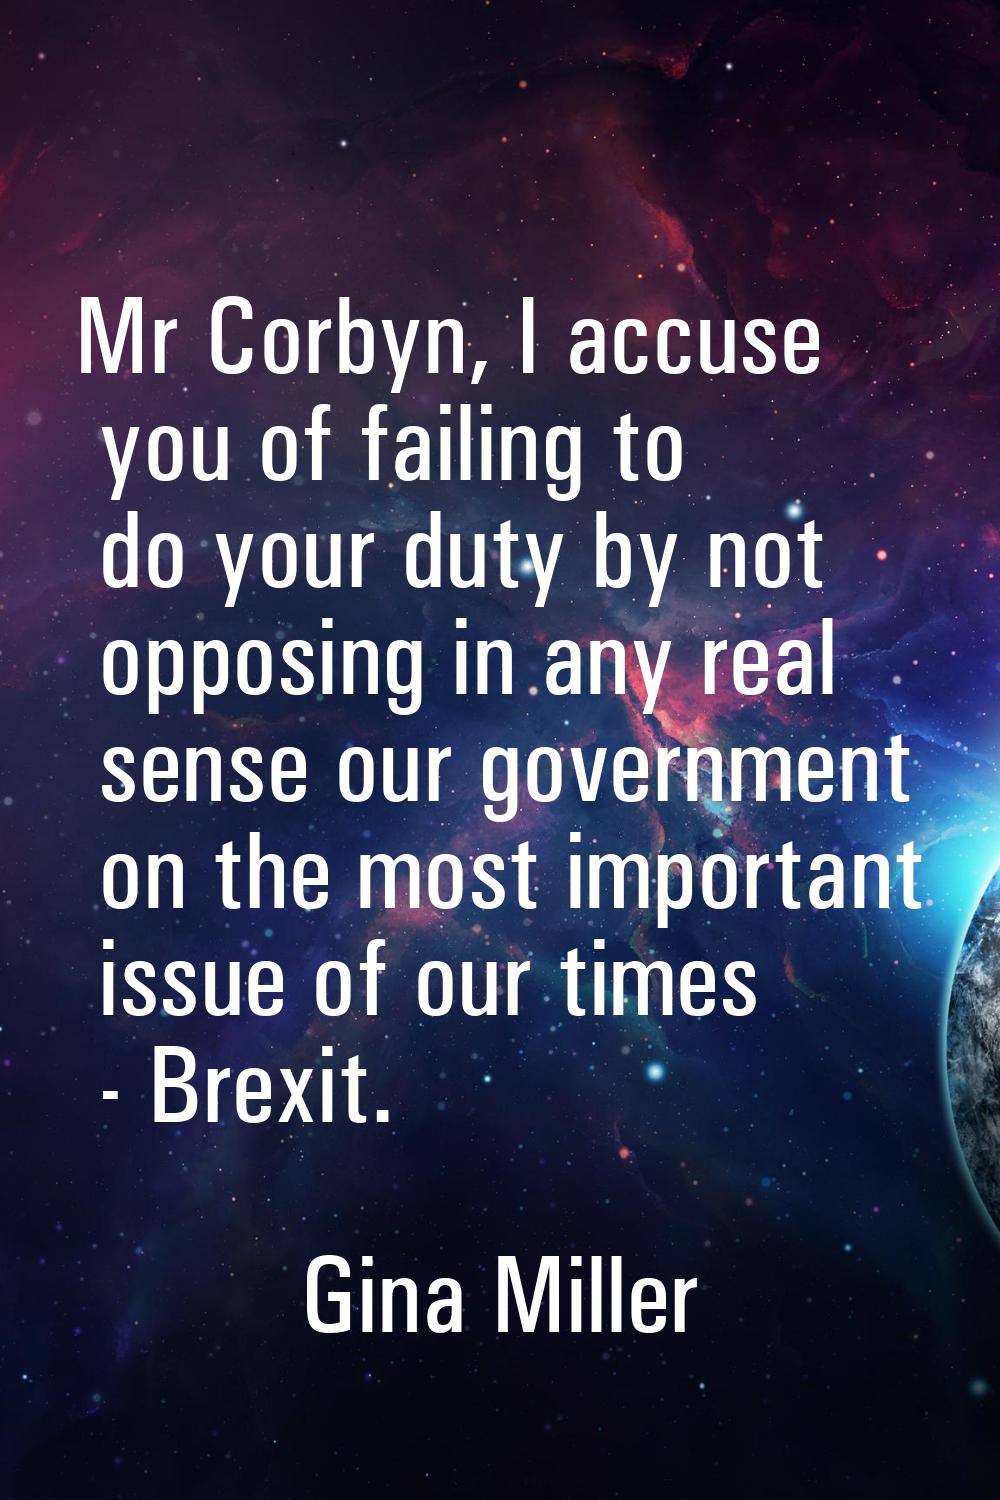 Mr Corbyn, I accuse you of failing to do your duty by not opposing in any real sense our government